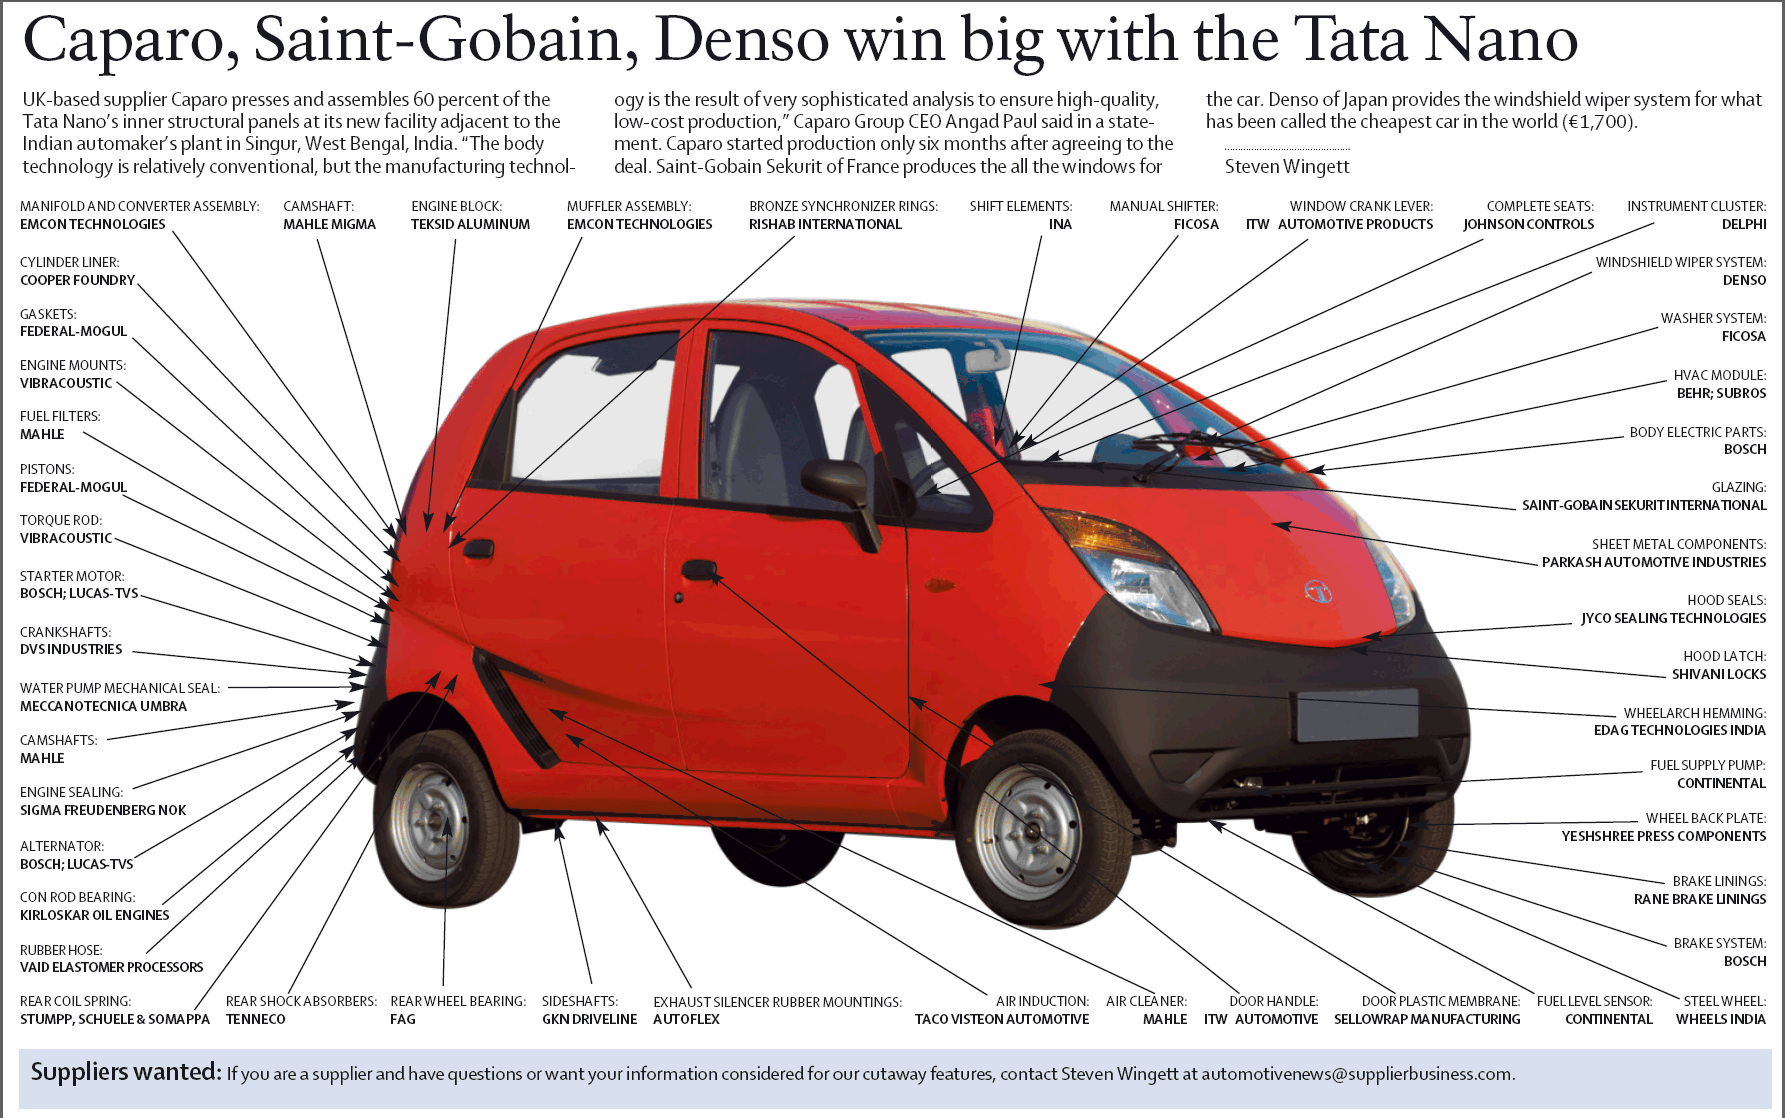 Tata Nano will be assembled and sold in Pakistan